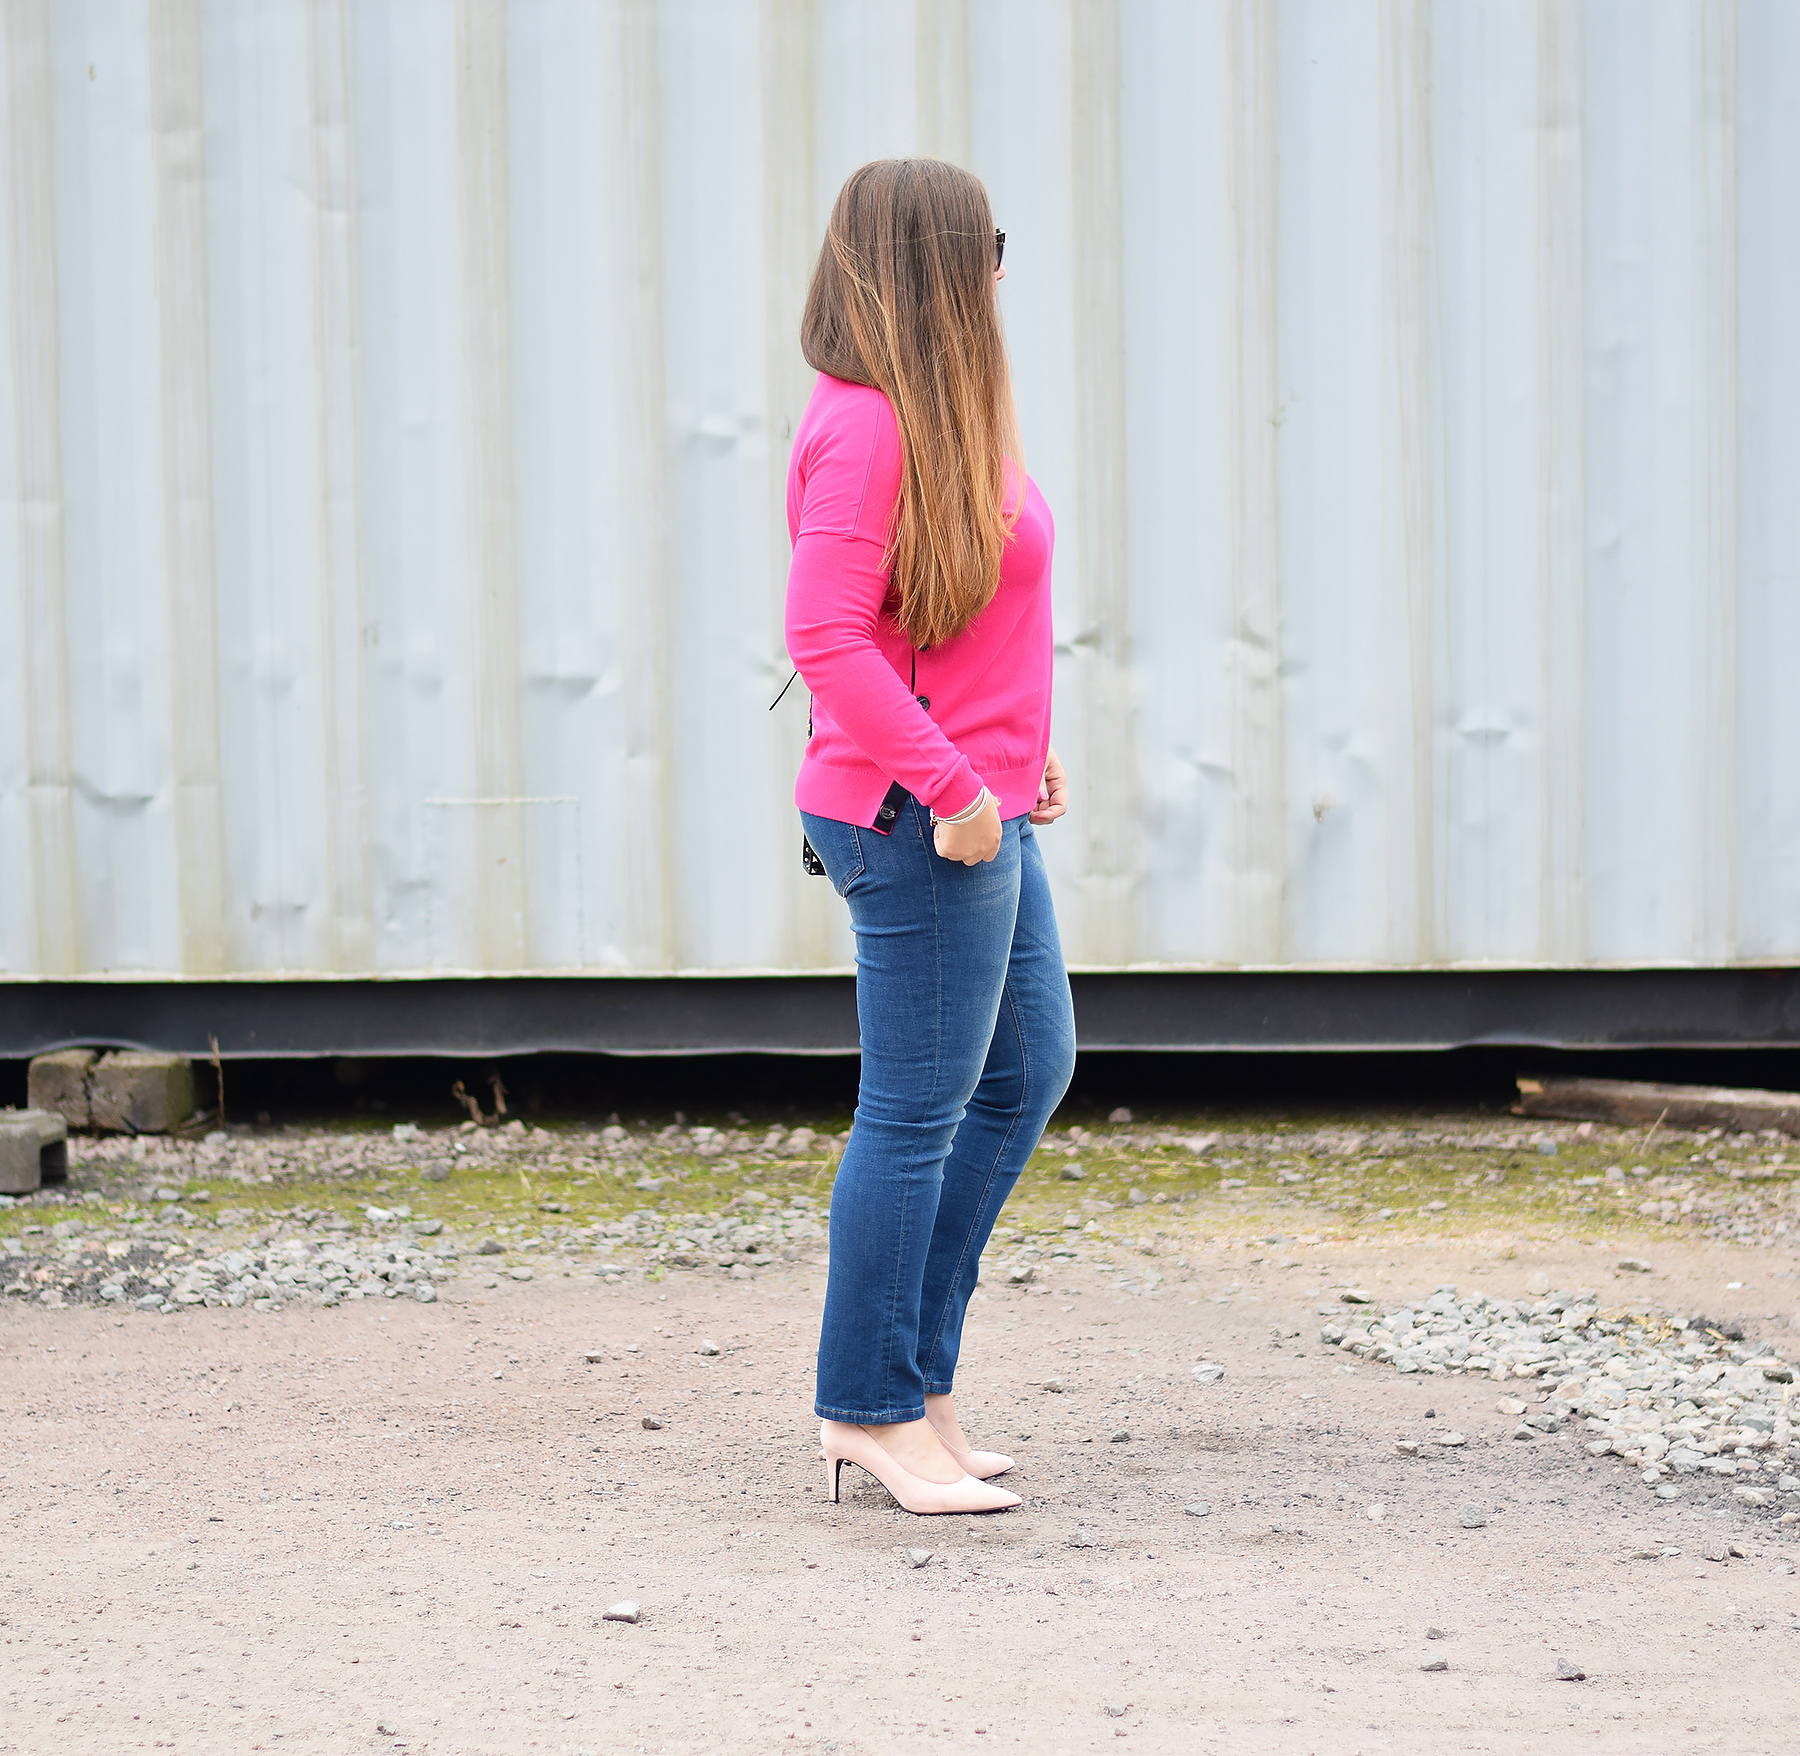 How to wear a bright pink jumper